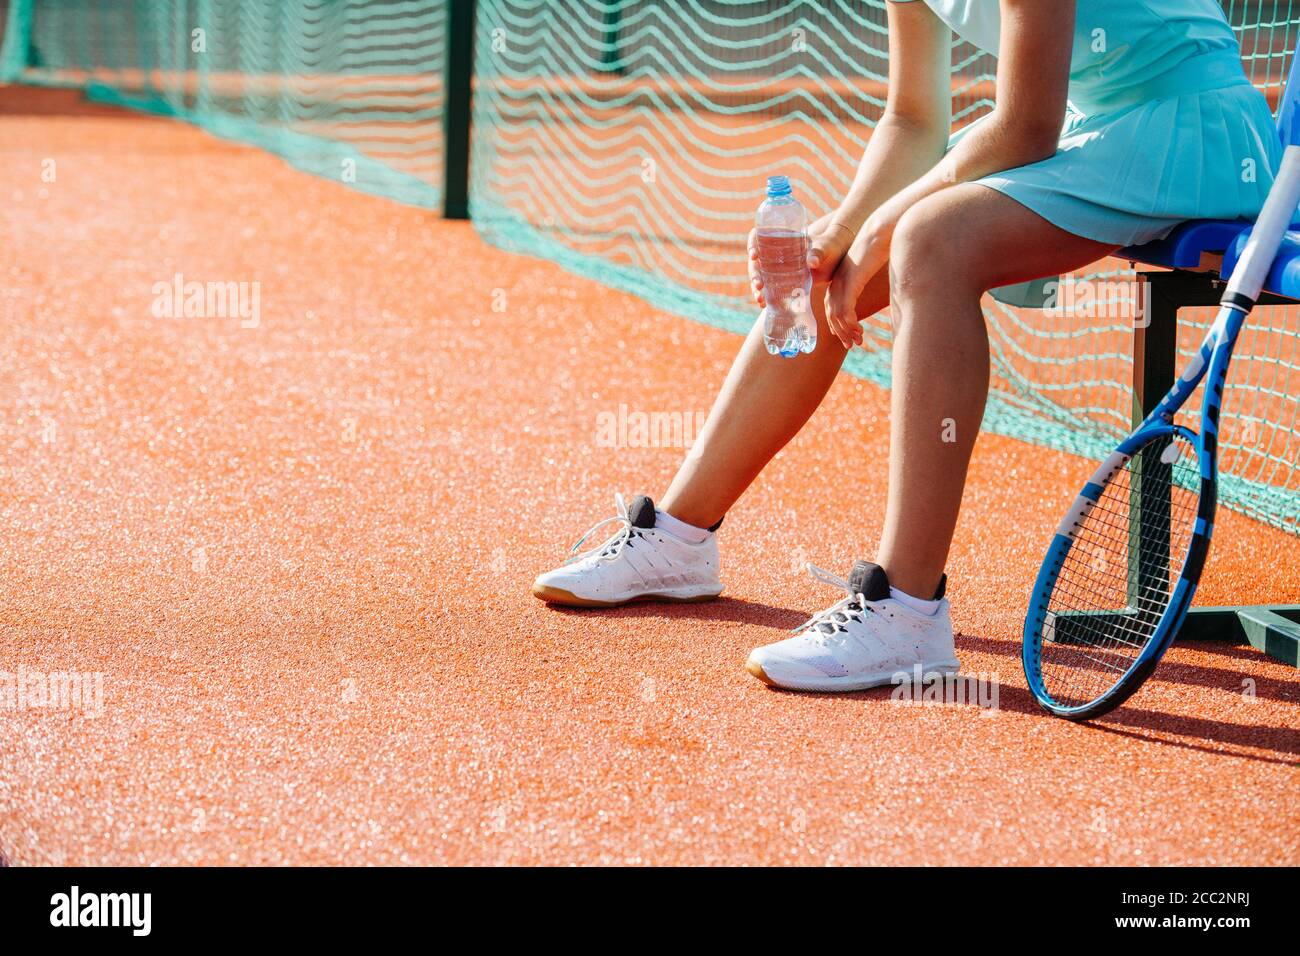 Legs of a girl sitting on a chair bench next to tennis court to take short break Stock Photo